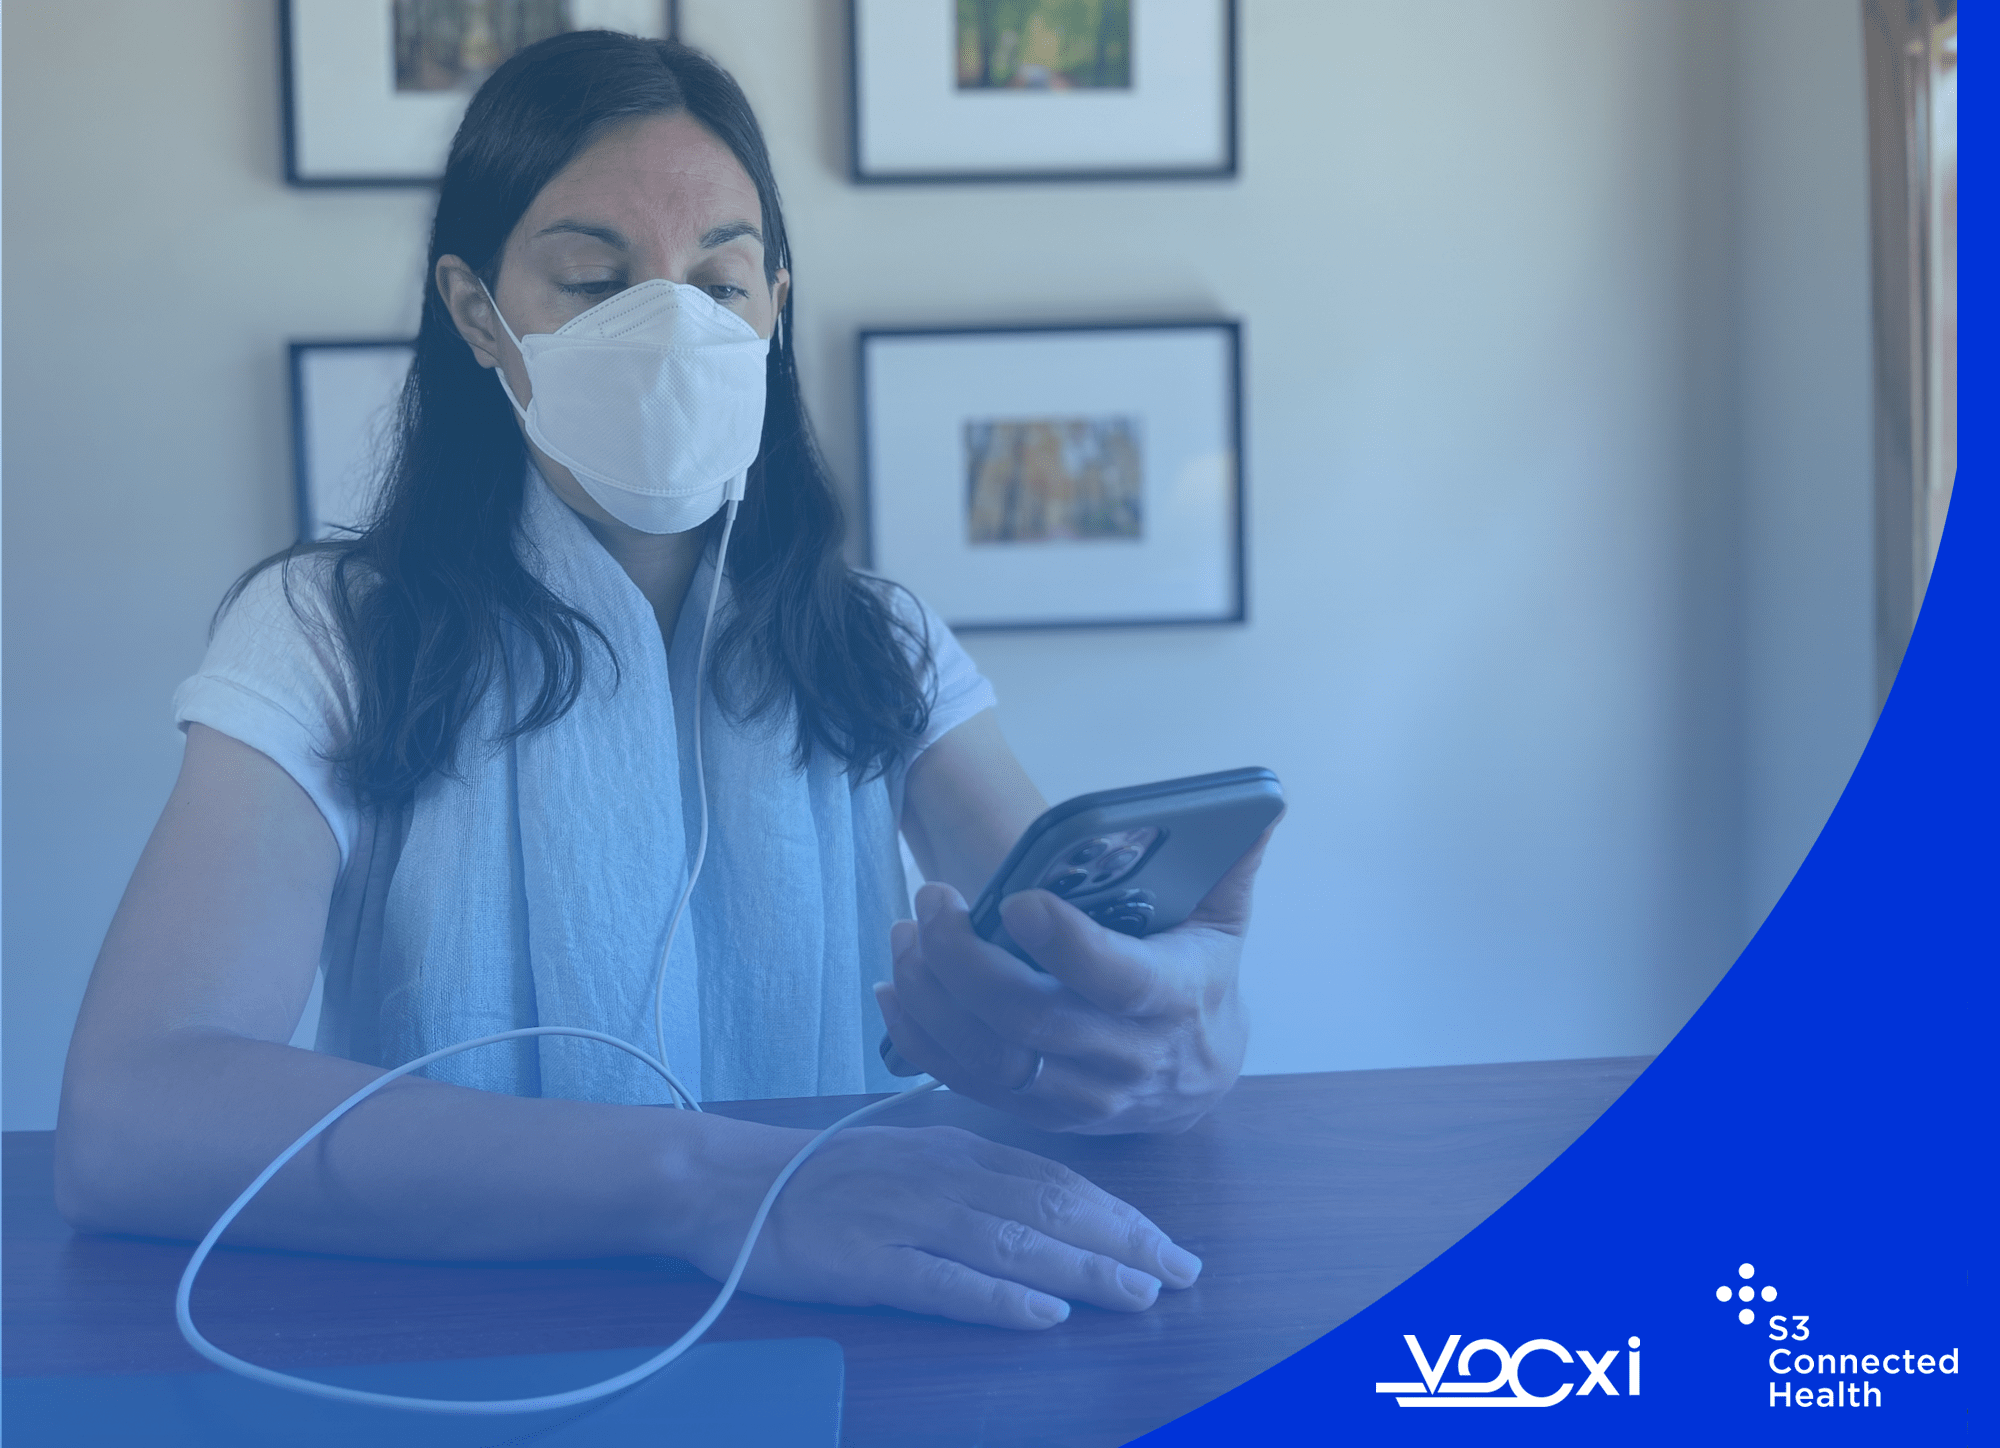 Vocxi Health and S3 Connected Health Partner to Transform Lung Cancer Screening and Monitoring